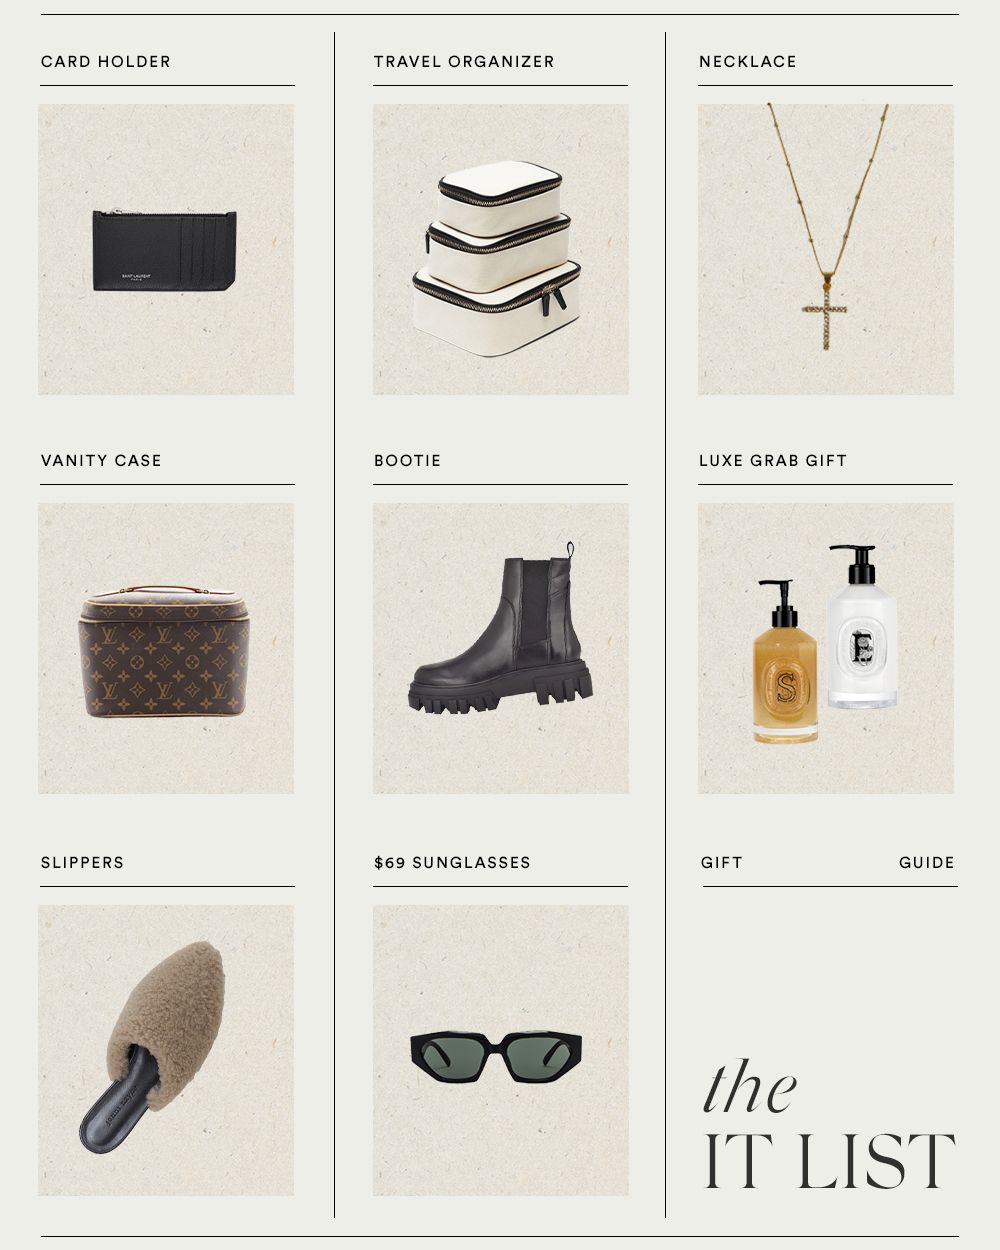 GIFT GUIDE: The ‘IT’ List